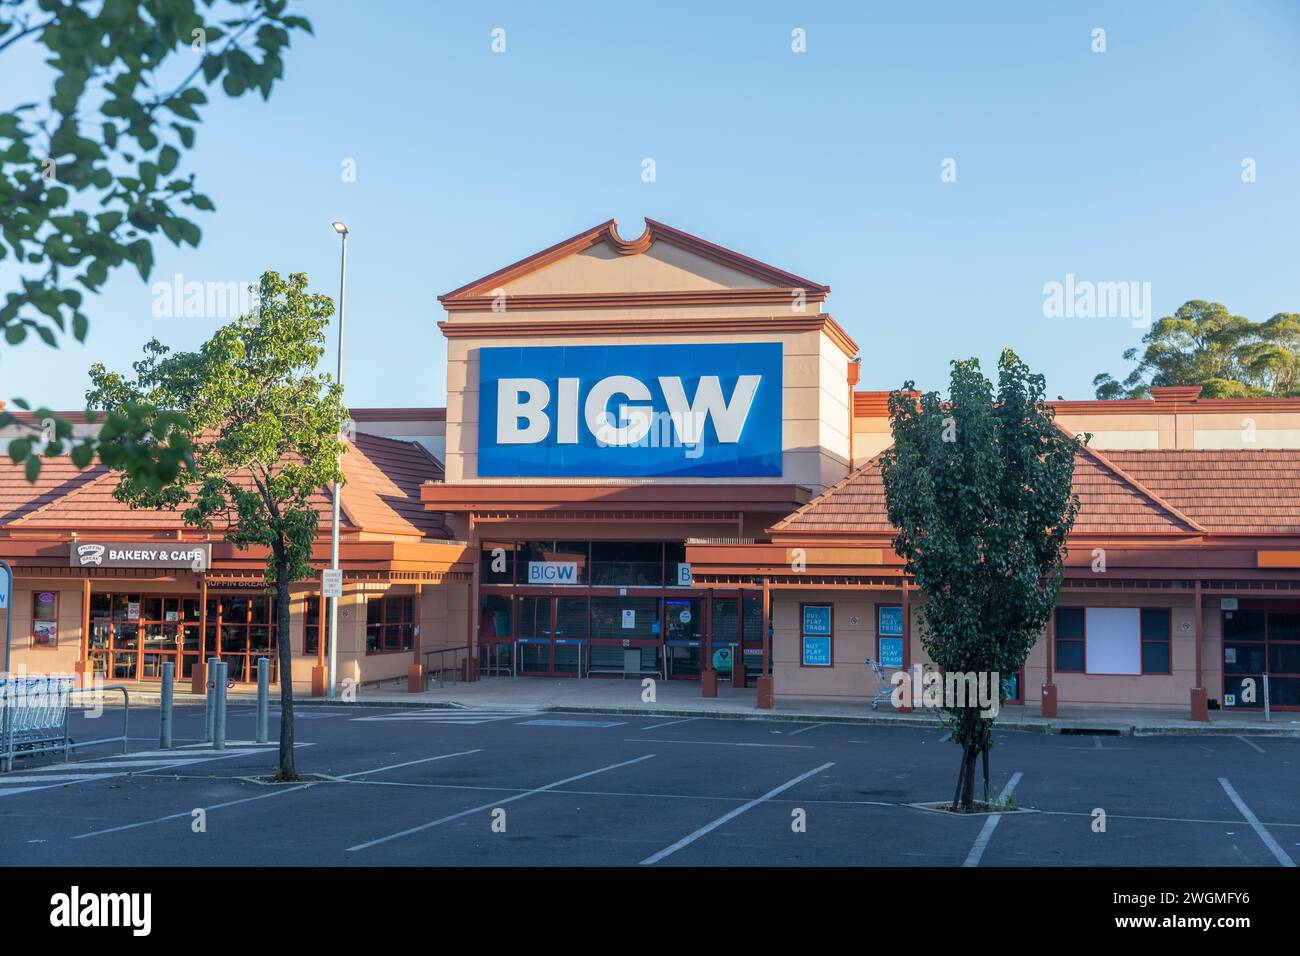 Big W, australian national retail chain of discounted department stores, pictured Big W store in Mudgee,NSW,Australia Stock Photo